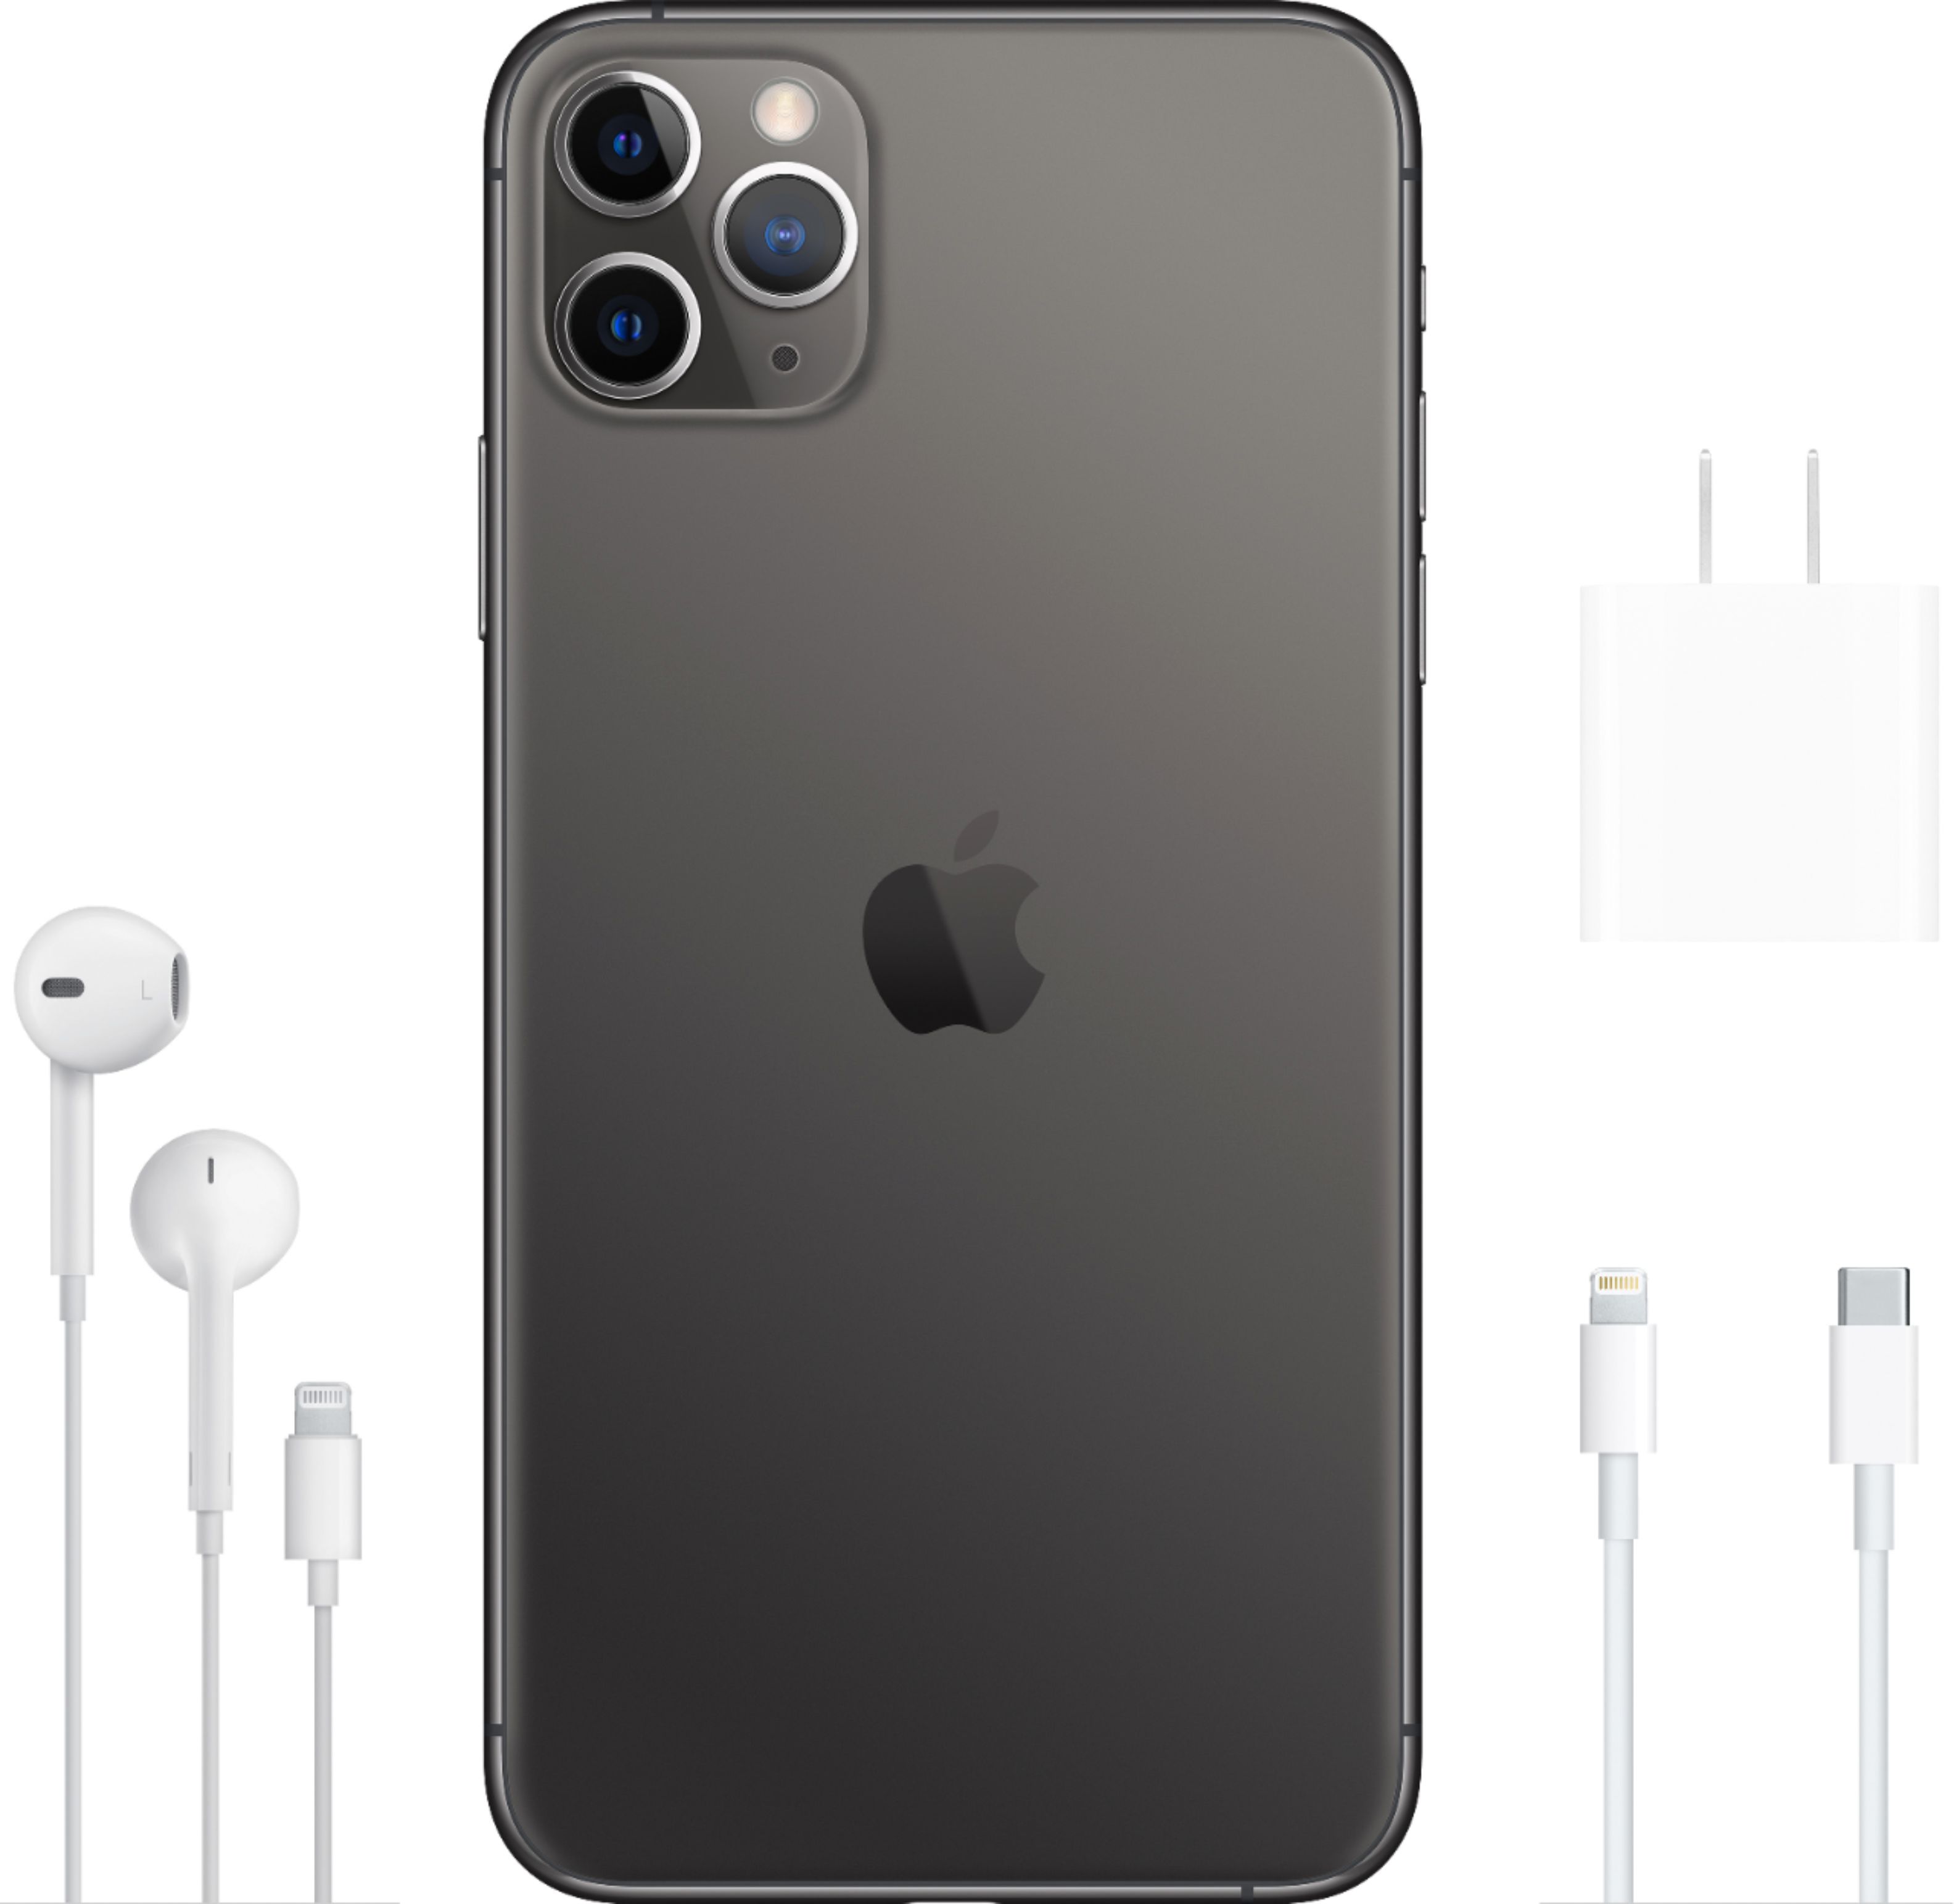 iPhone 11 Pro 256GB - Space Gray - Ola Tech - The best tech (less) money  can buy